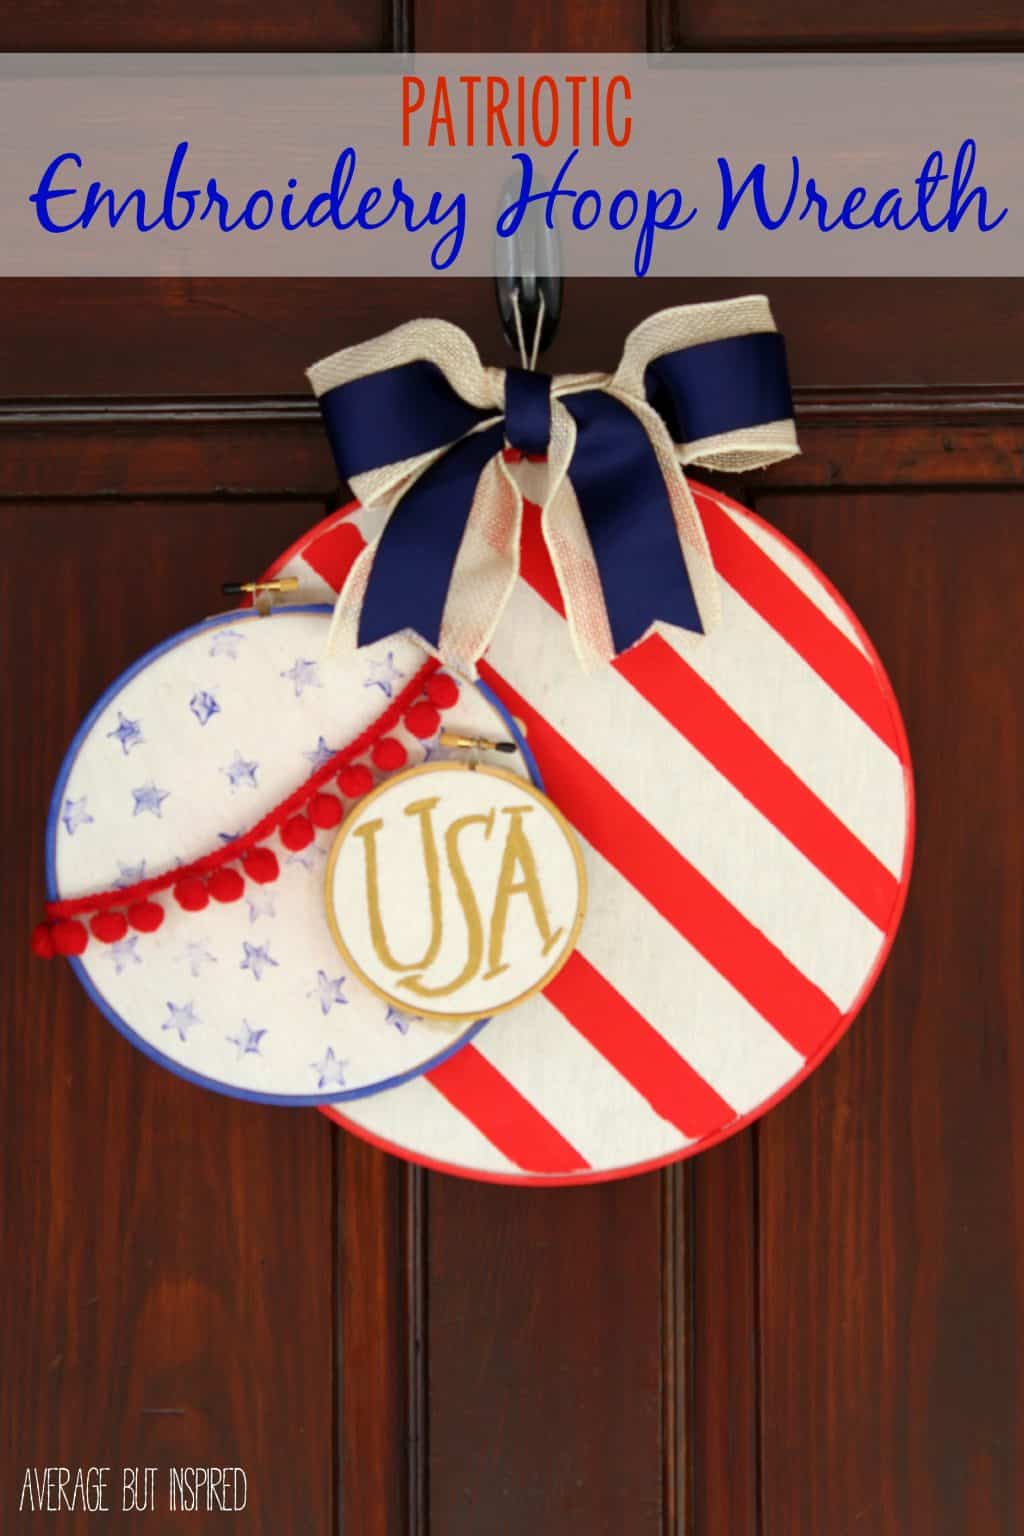 This unique embroidery hoop wreath will add a perfect touch of Americana to your front door for any patriotic holiday!